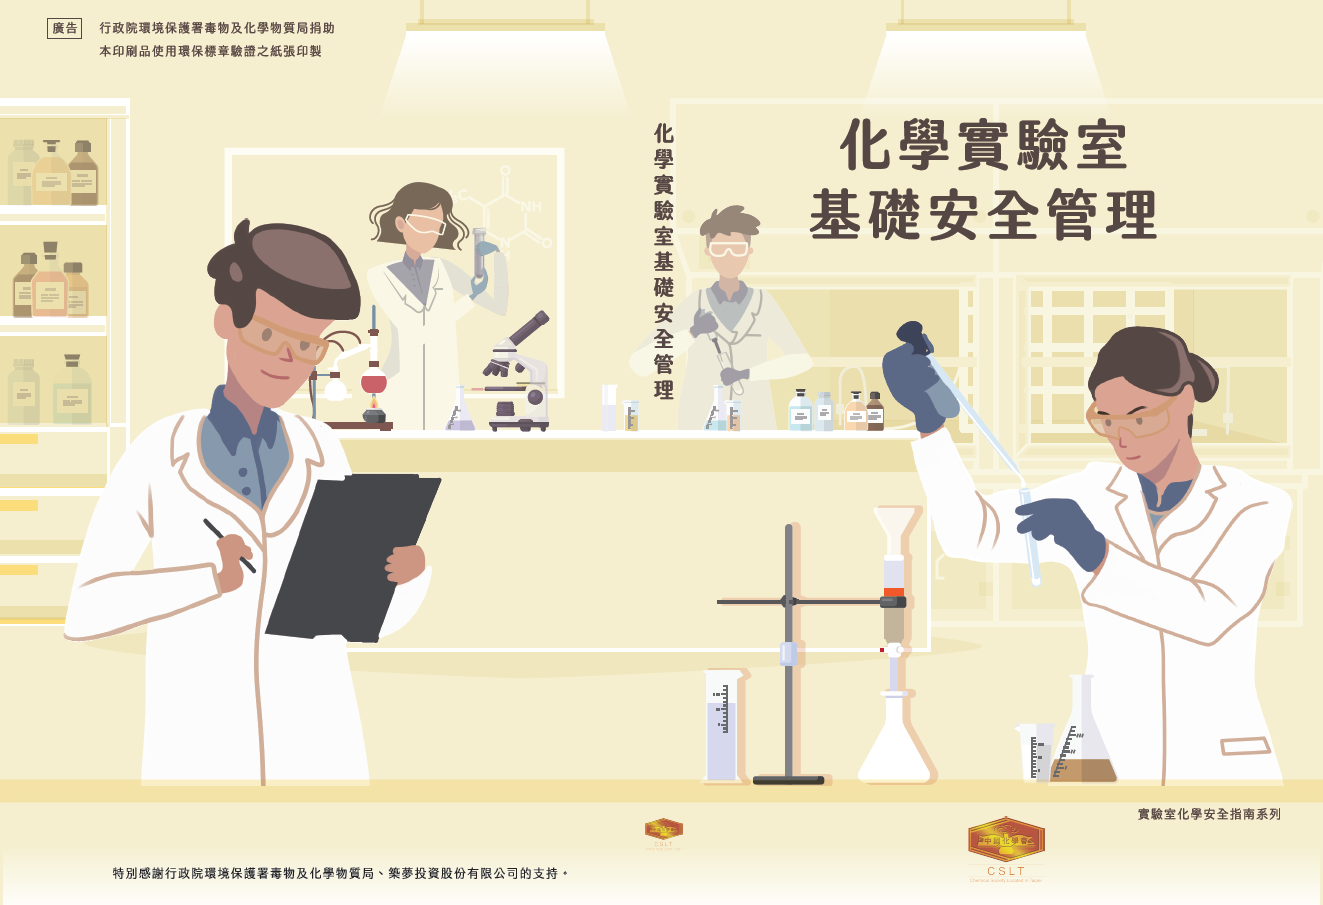 laboratory-safety-guide-books-safety-management-and-risk-assessment-in-chemical-laboratories-front-and-back-cover